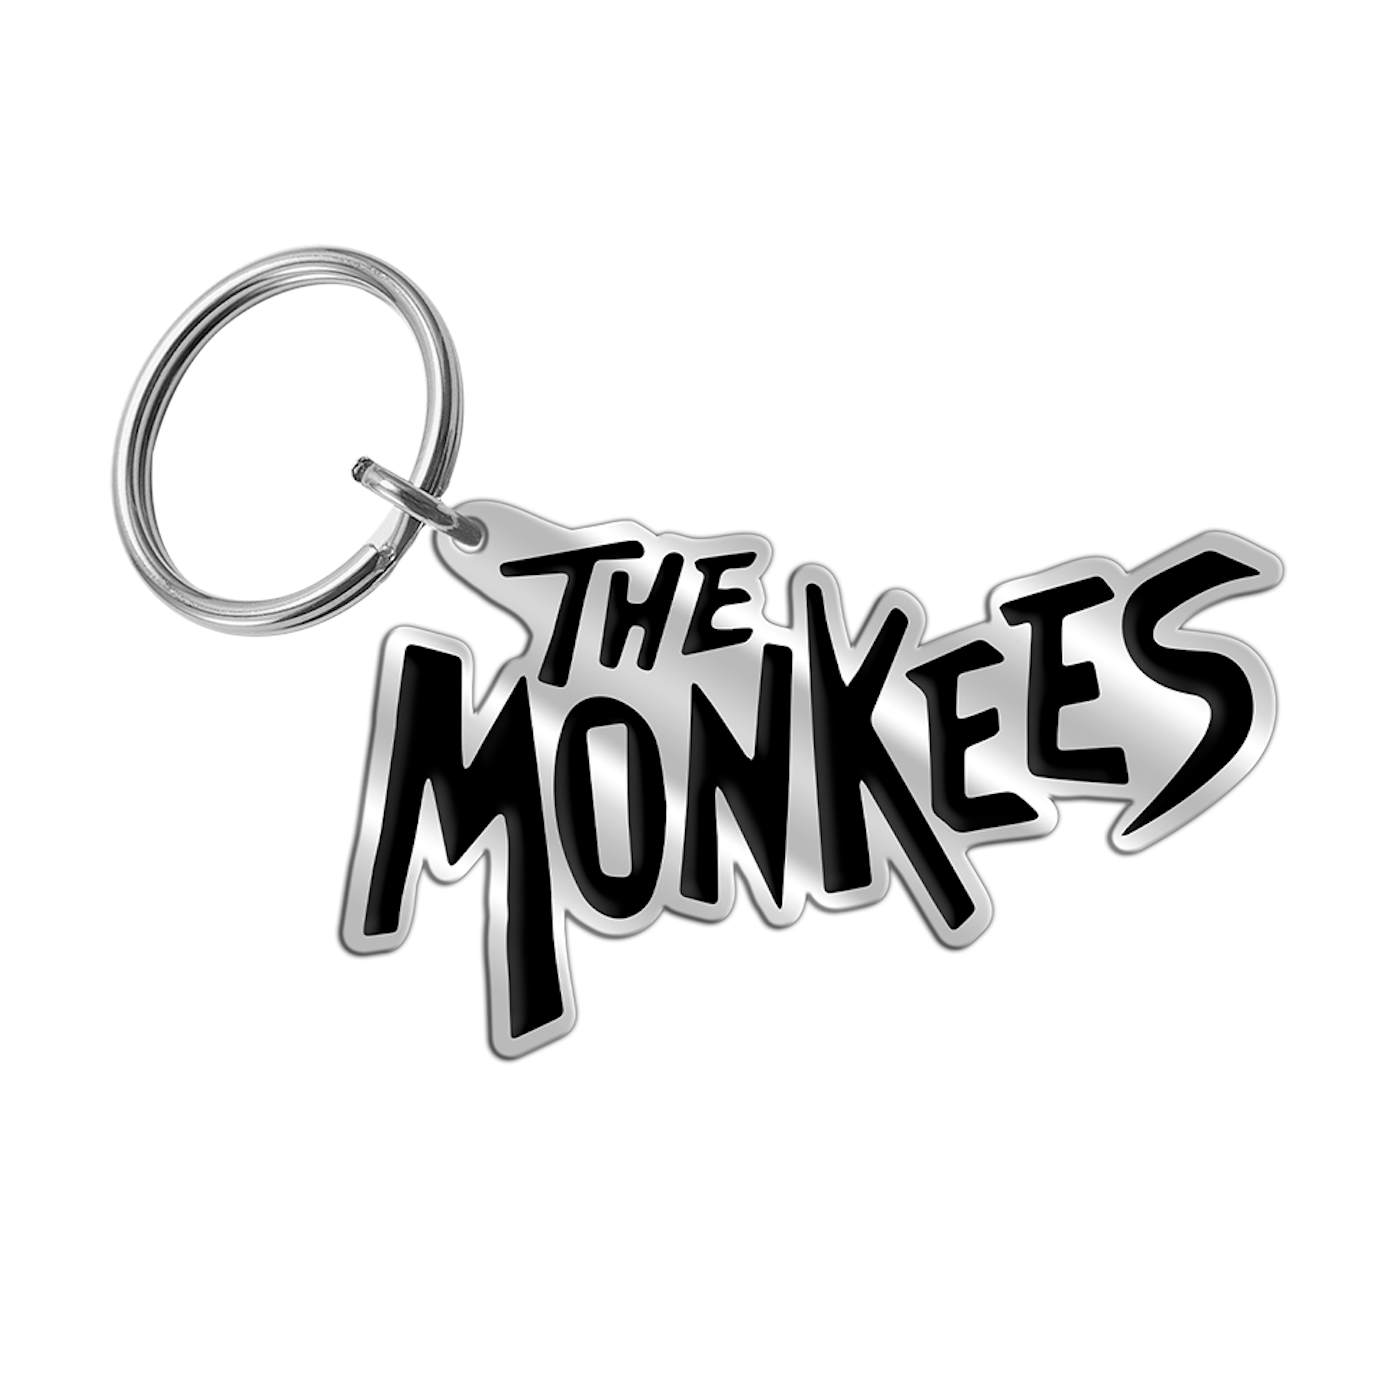 The Monkees TV Keychain